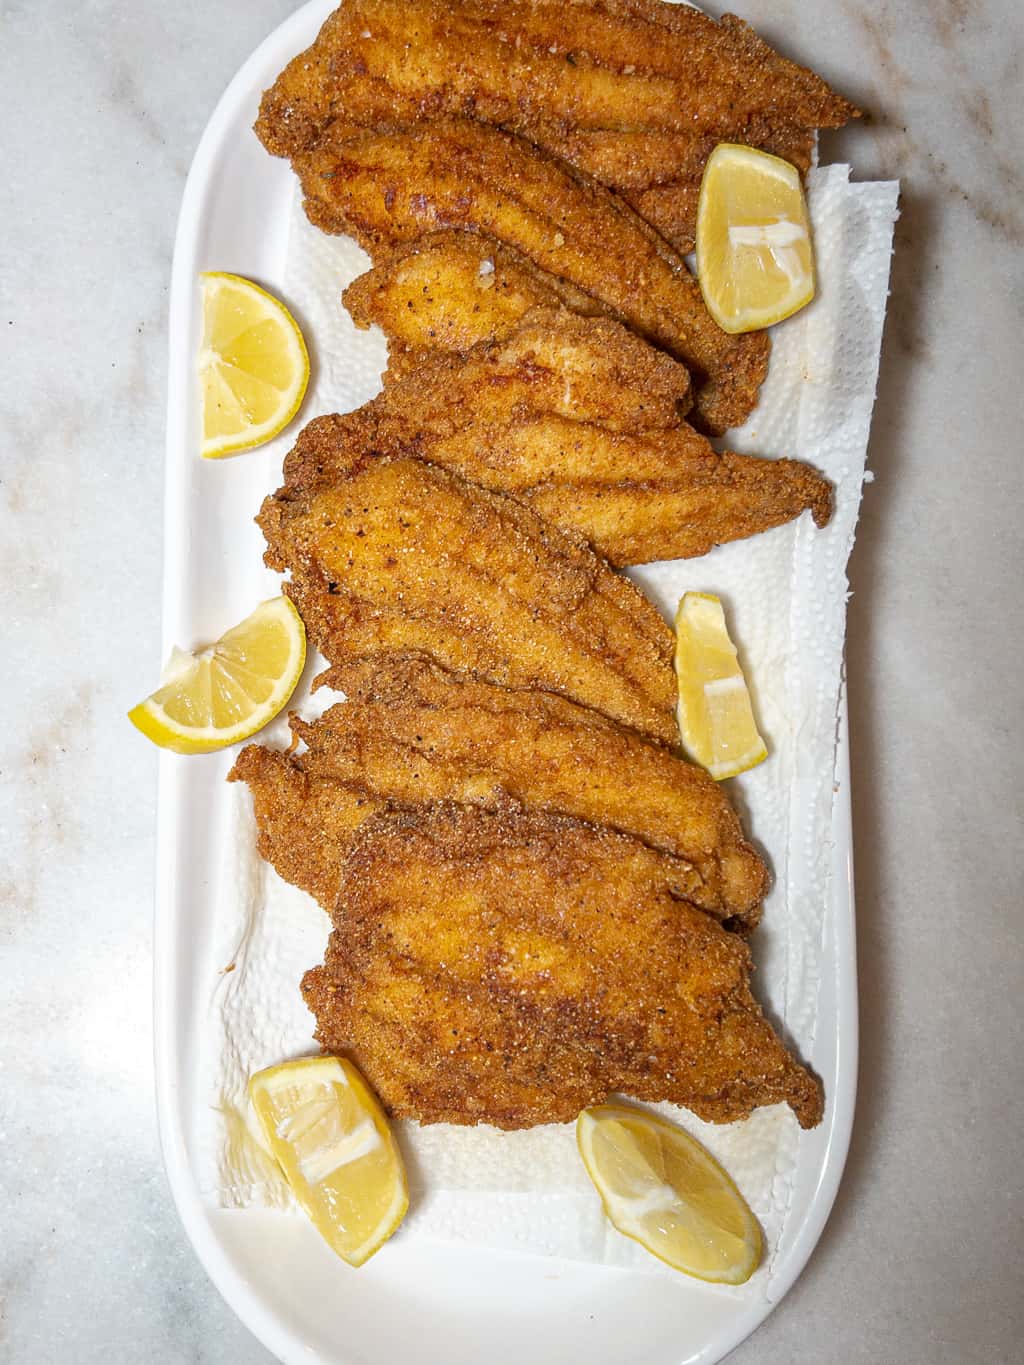 fried catfish filets on a platter with lemon wedges as a garnish